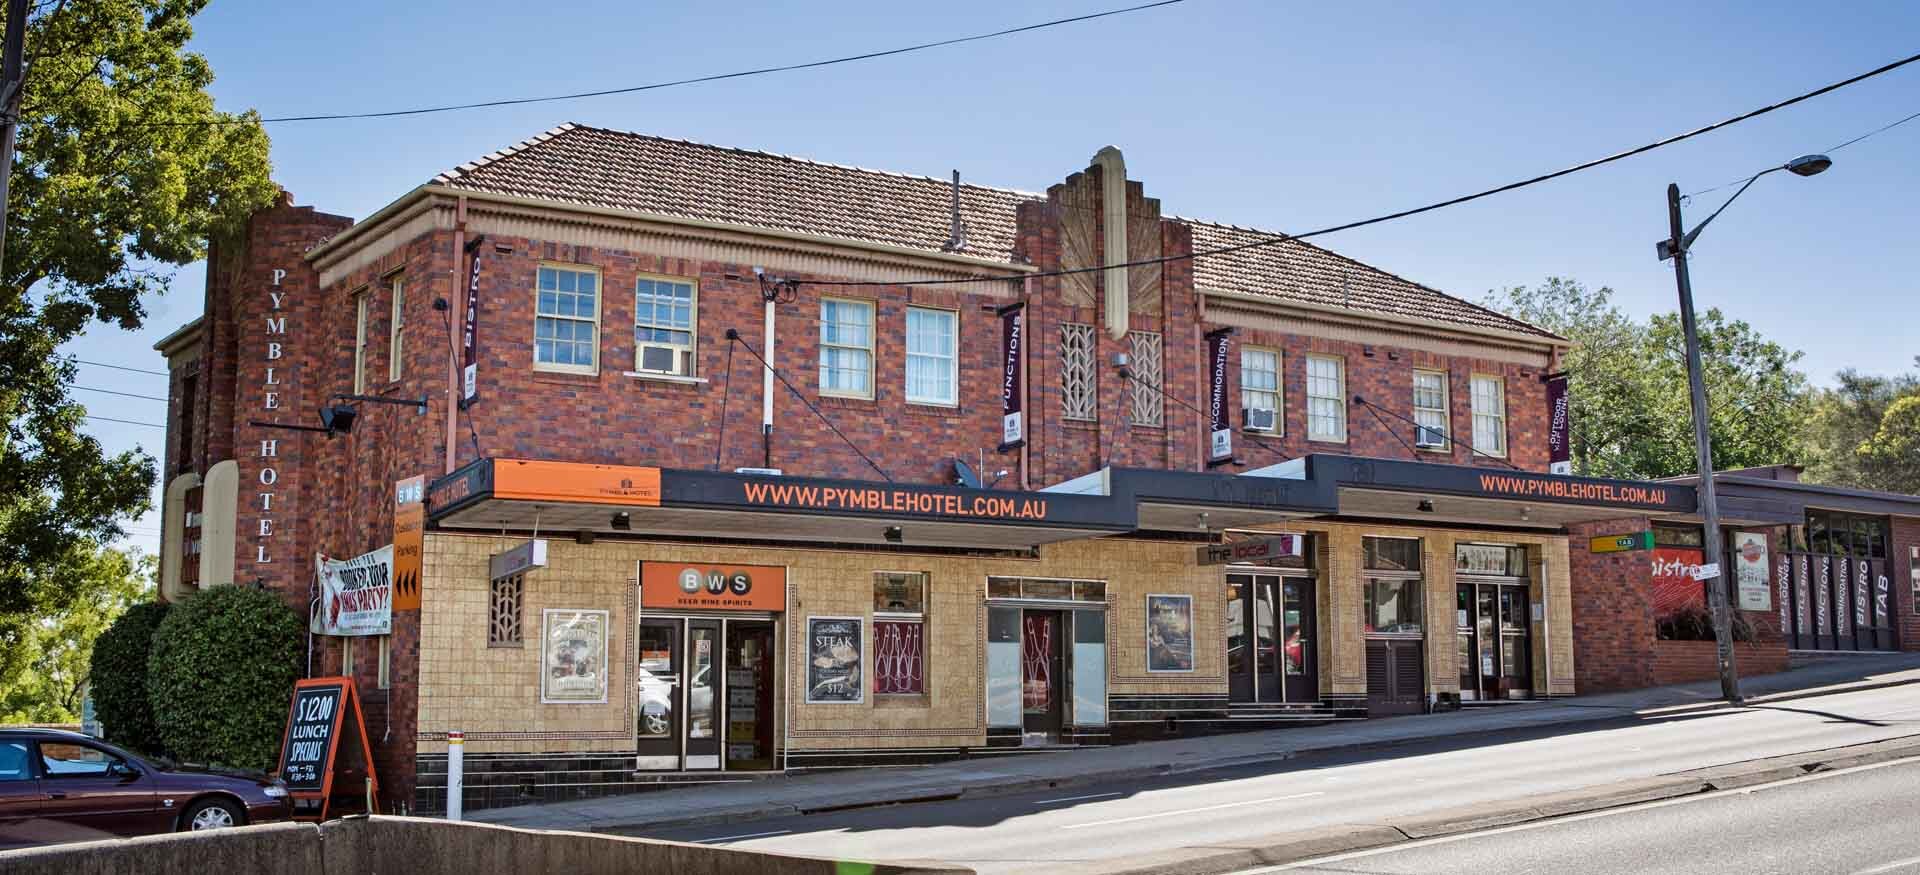 The historic Pymble pub located on the Pacific Highway